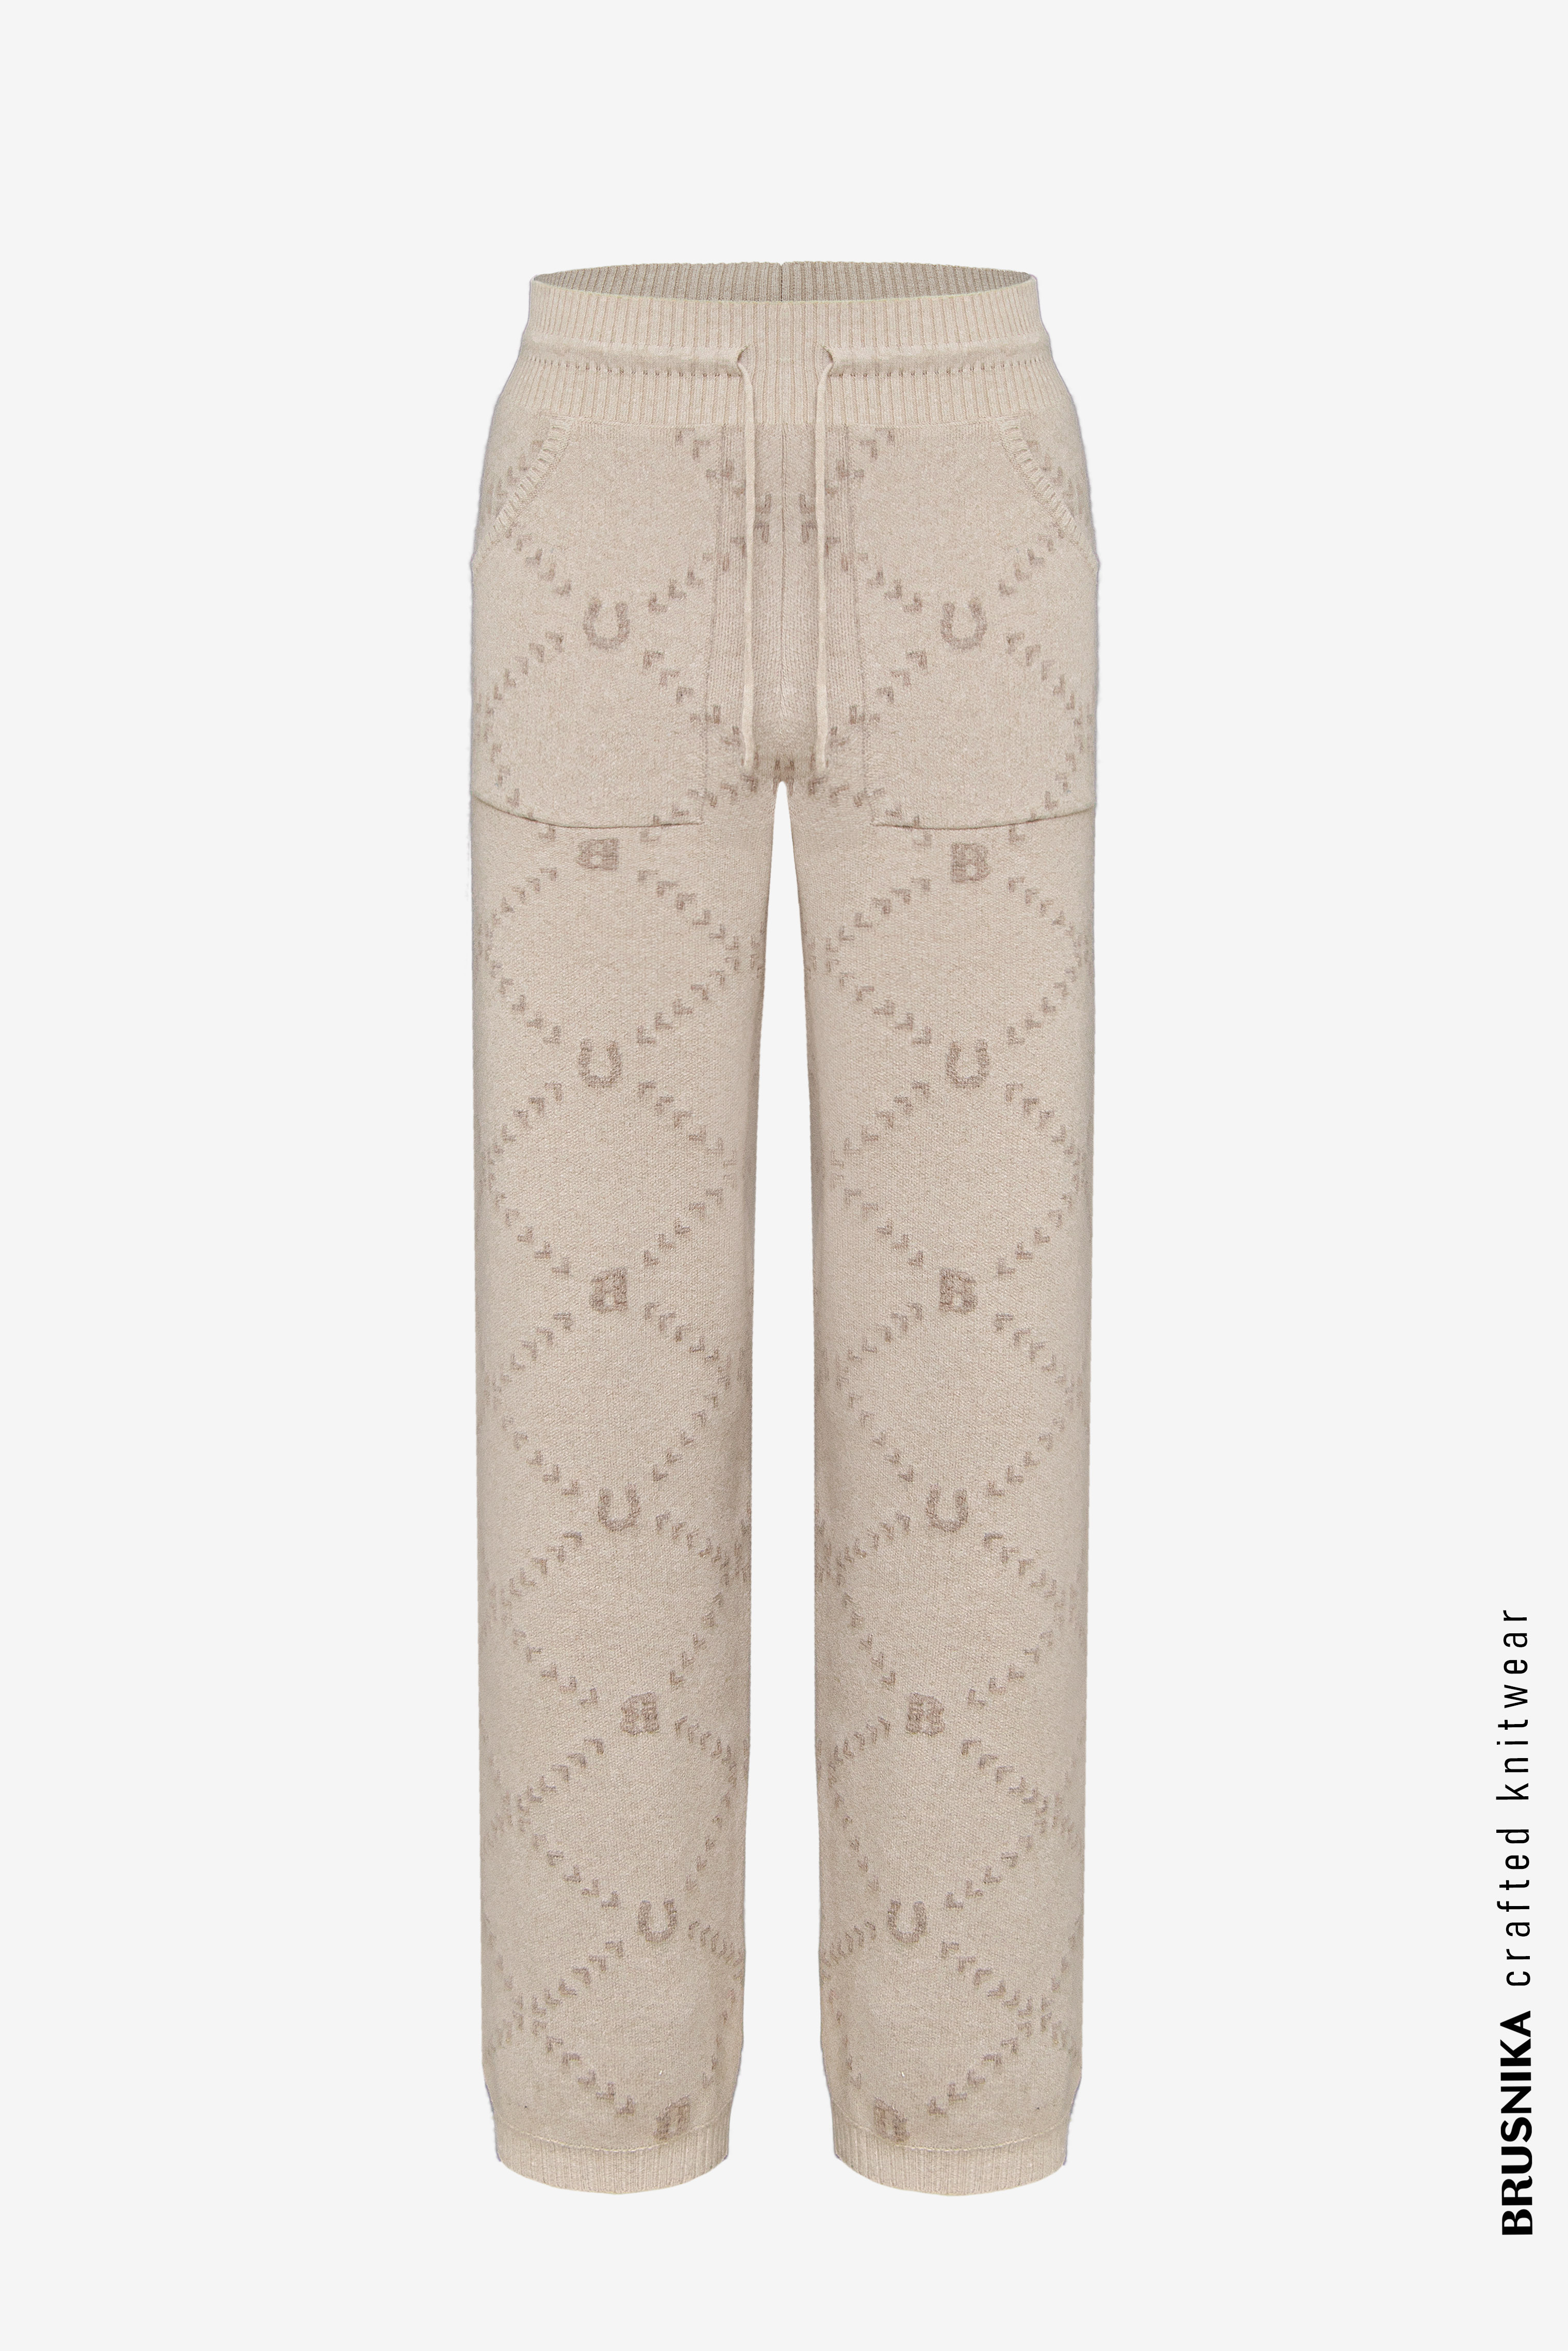 Trousers 4322-45 Beige from BRUSNiKA